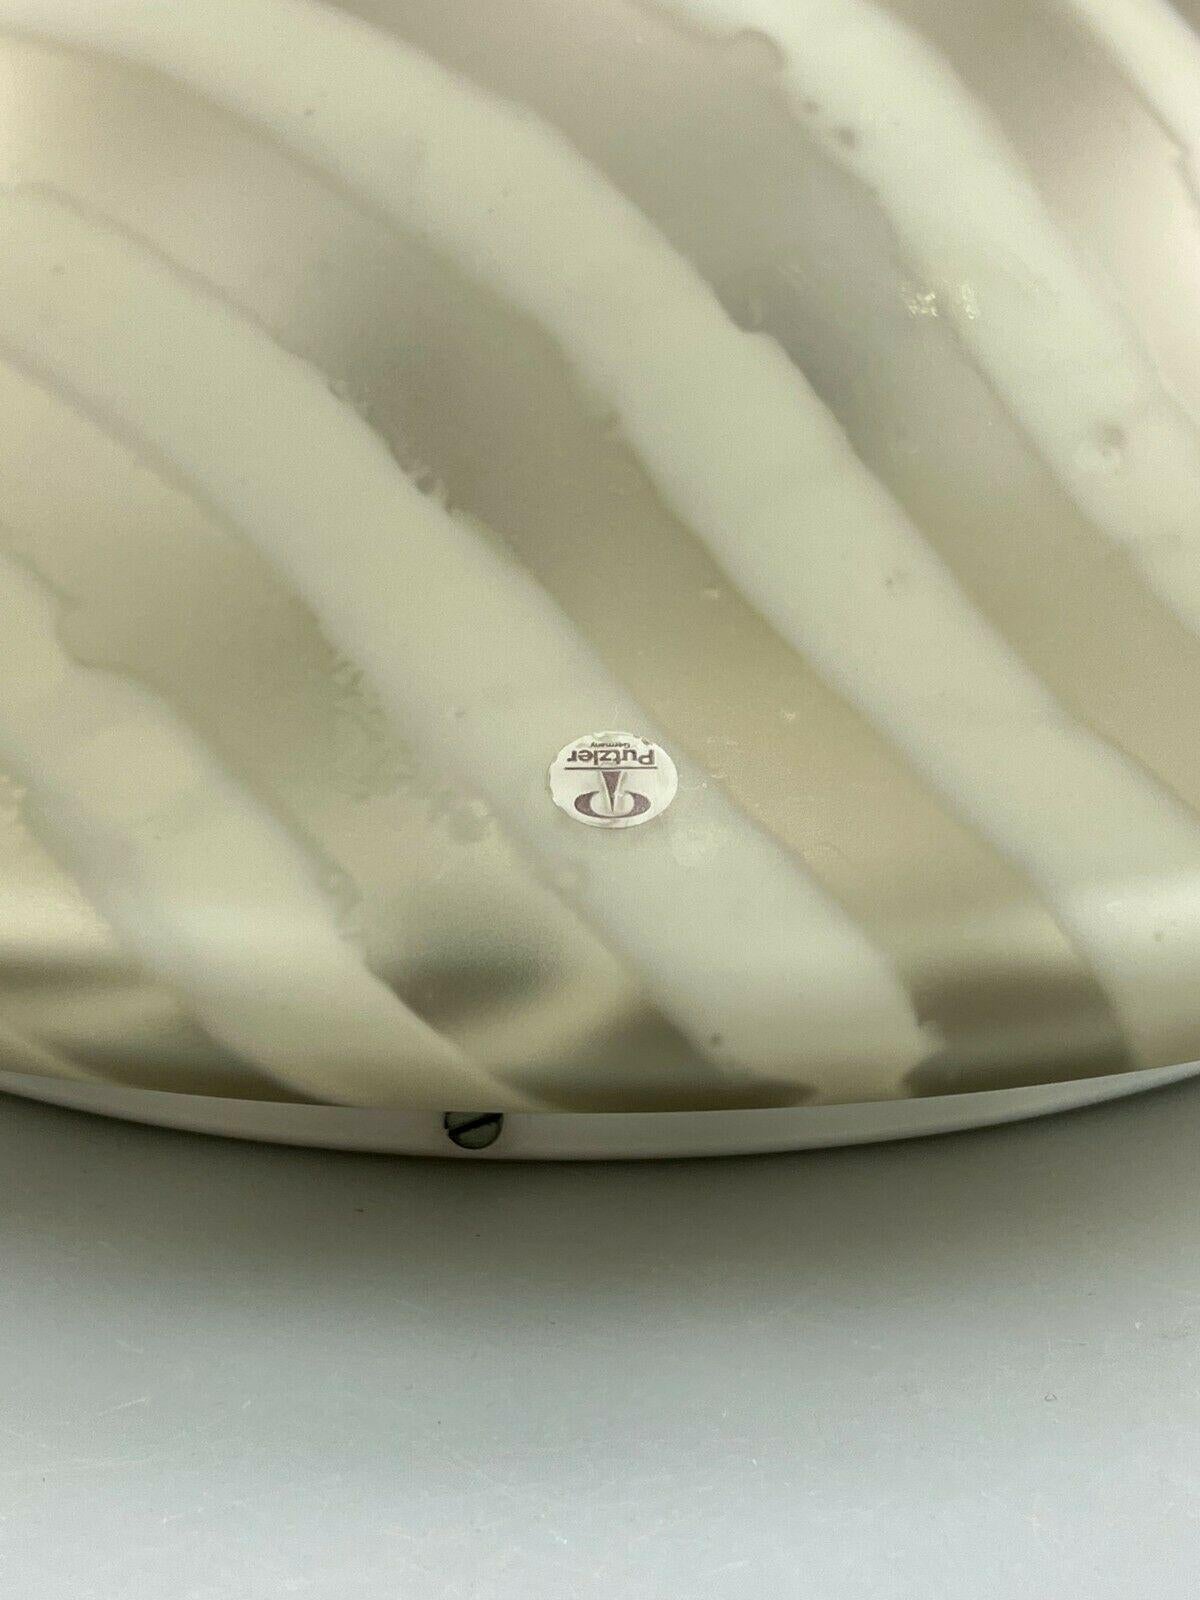 70s Peill & Putzler Plafoniere Ceiling Lamp Glass Space Design Lamp In Good Condition For Sale In Neuenkirchen, NI